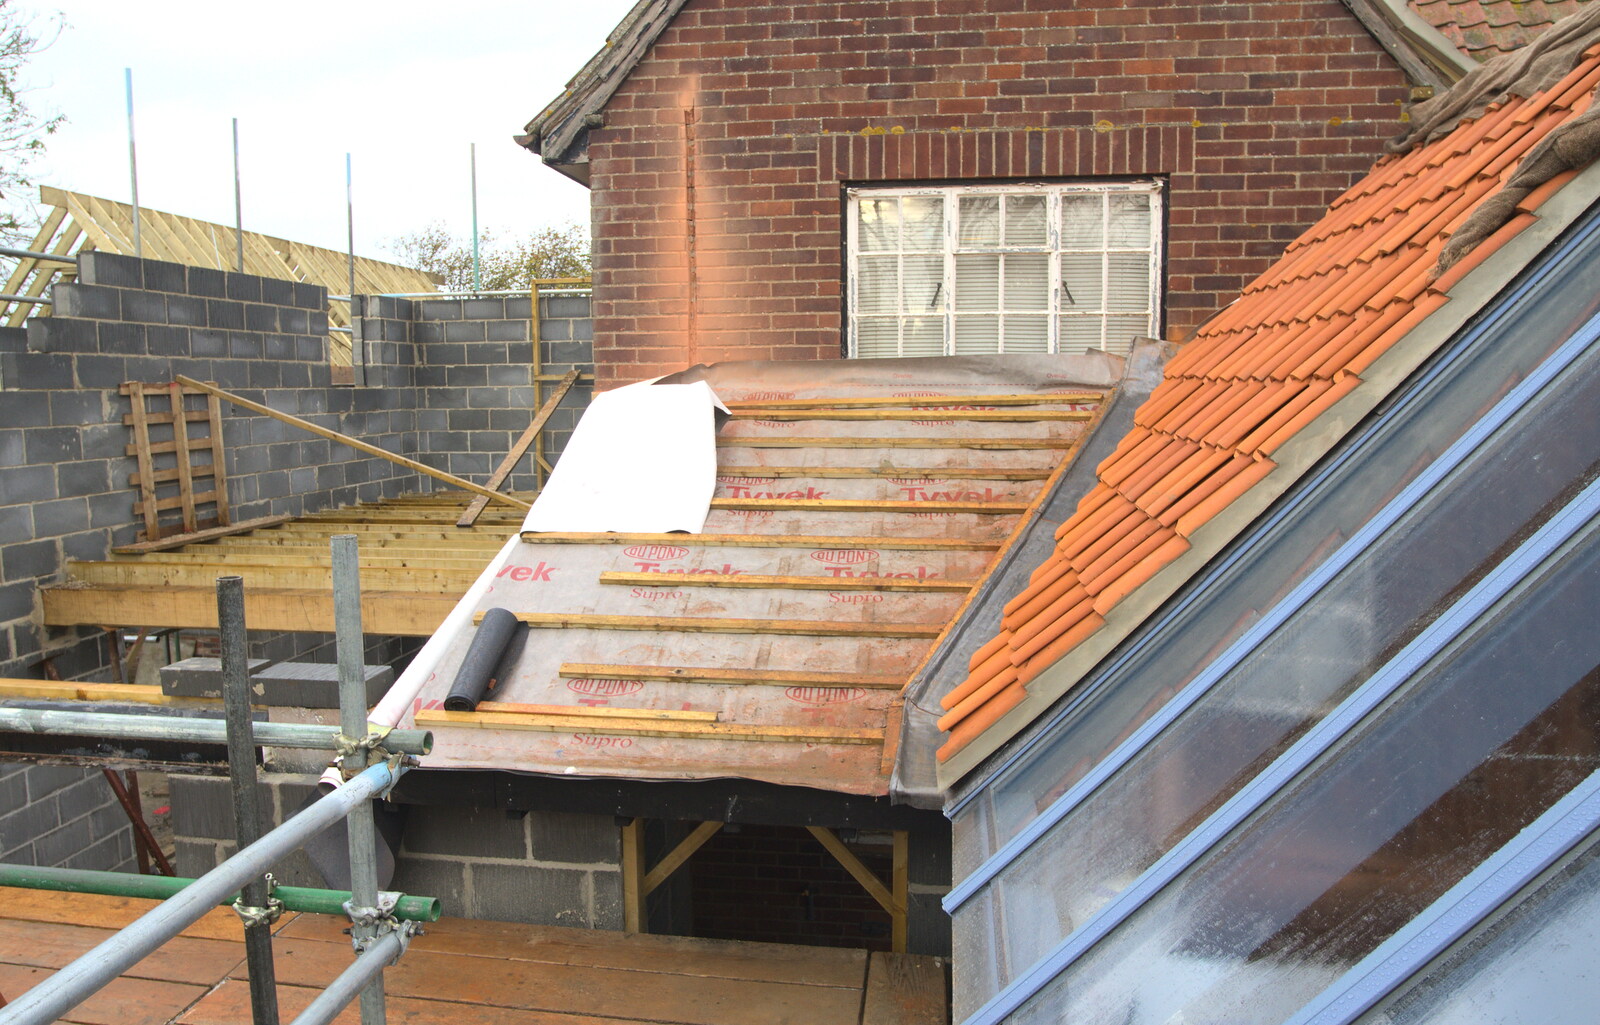 More Building and Palgrave Playground, Suffolk - 24th November 2013: The new pantry roof